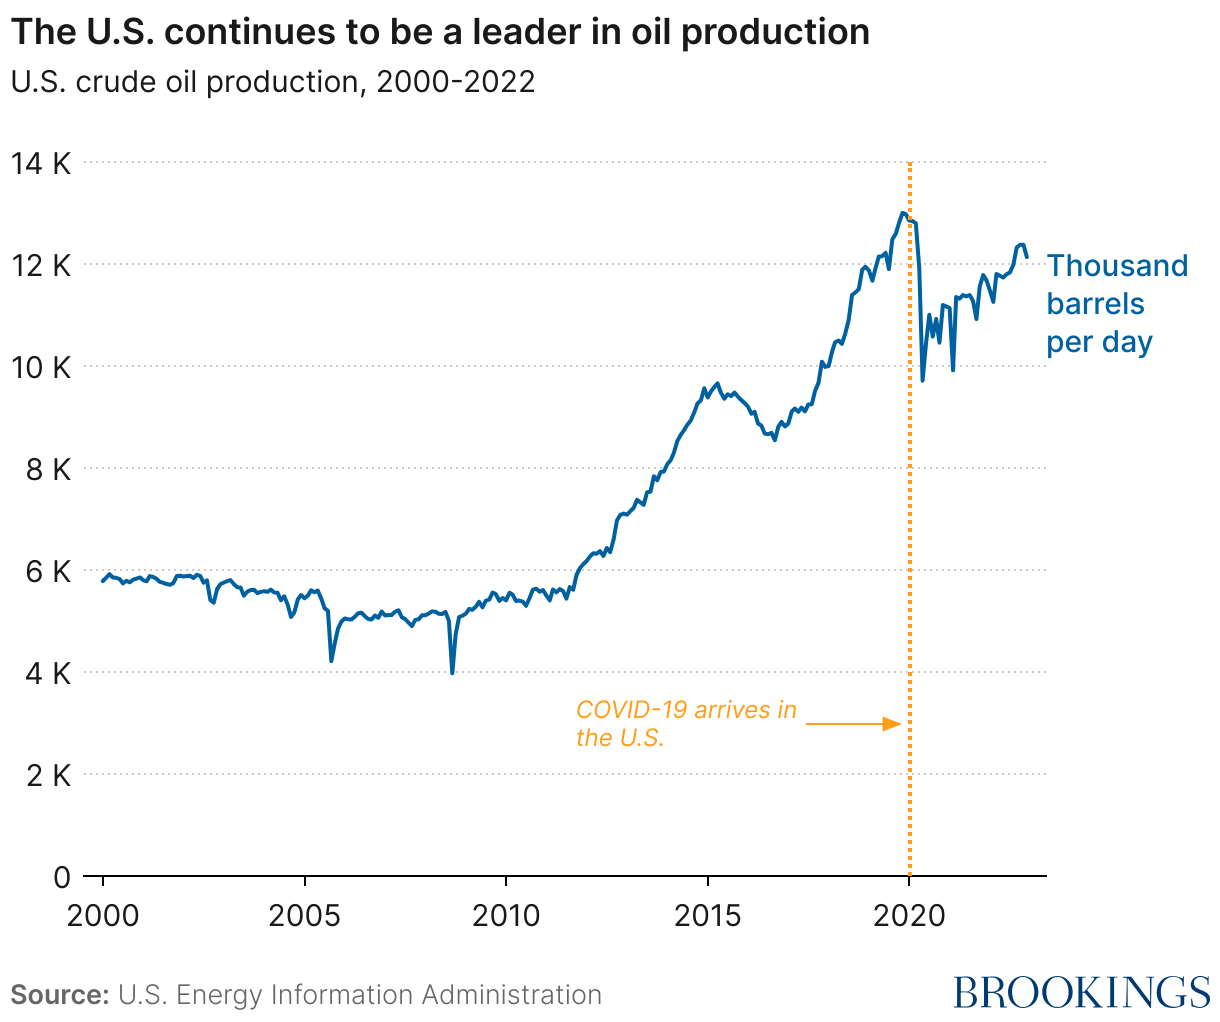 Oil Production and Politics